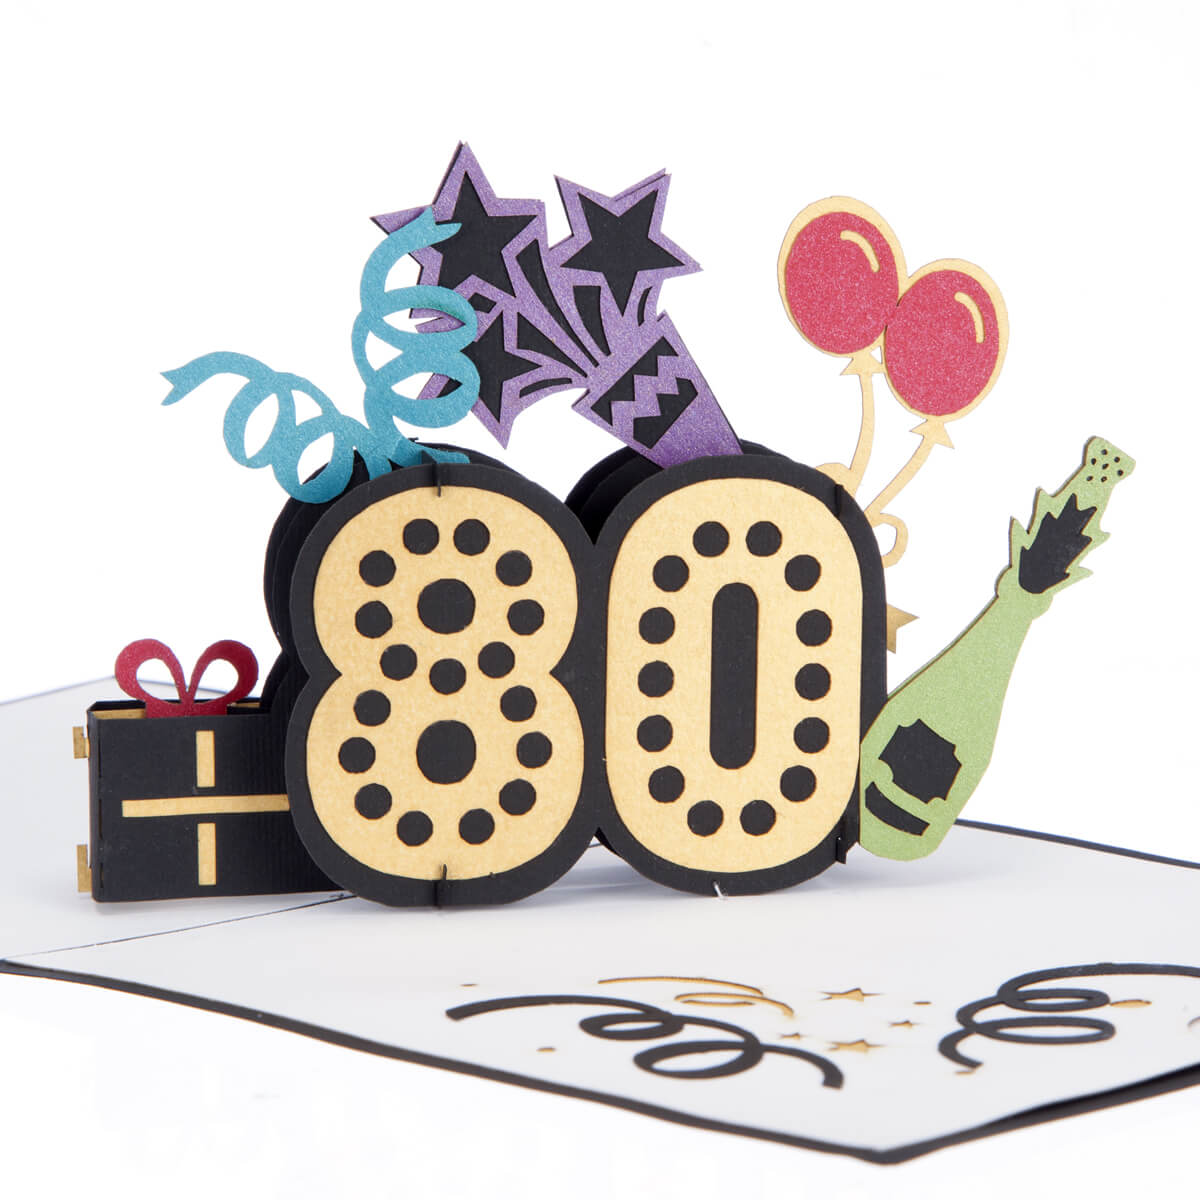 close up image of colourful 80th birthday pop up card